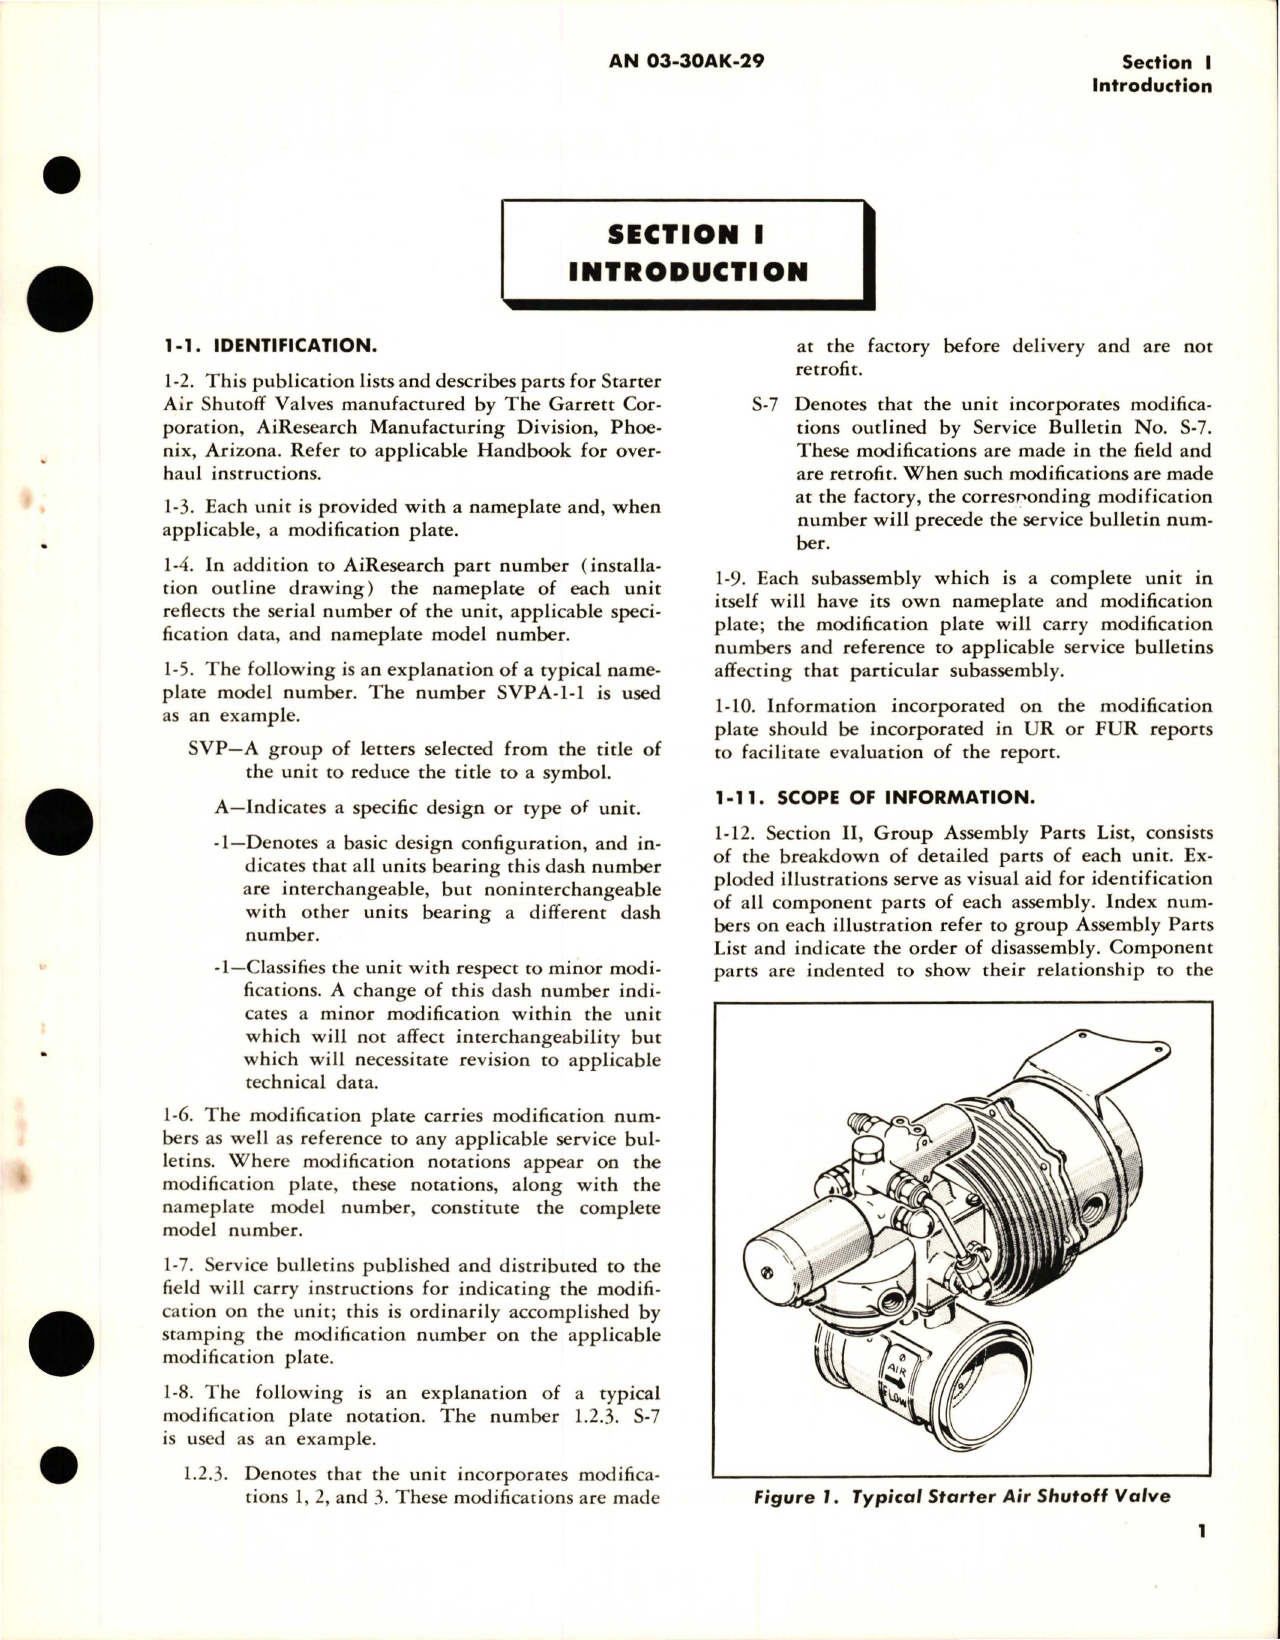 Sample page 5 from AirCorps Library document: Illustrated Parts Breakdown for Starter Air Shutoff Valve - Part 105054 - Model SVPA-1